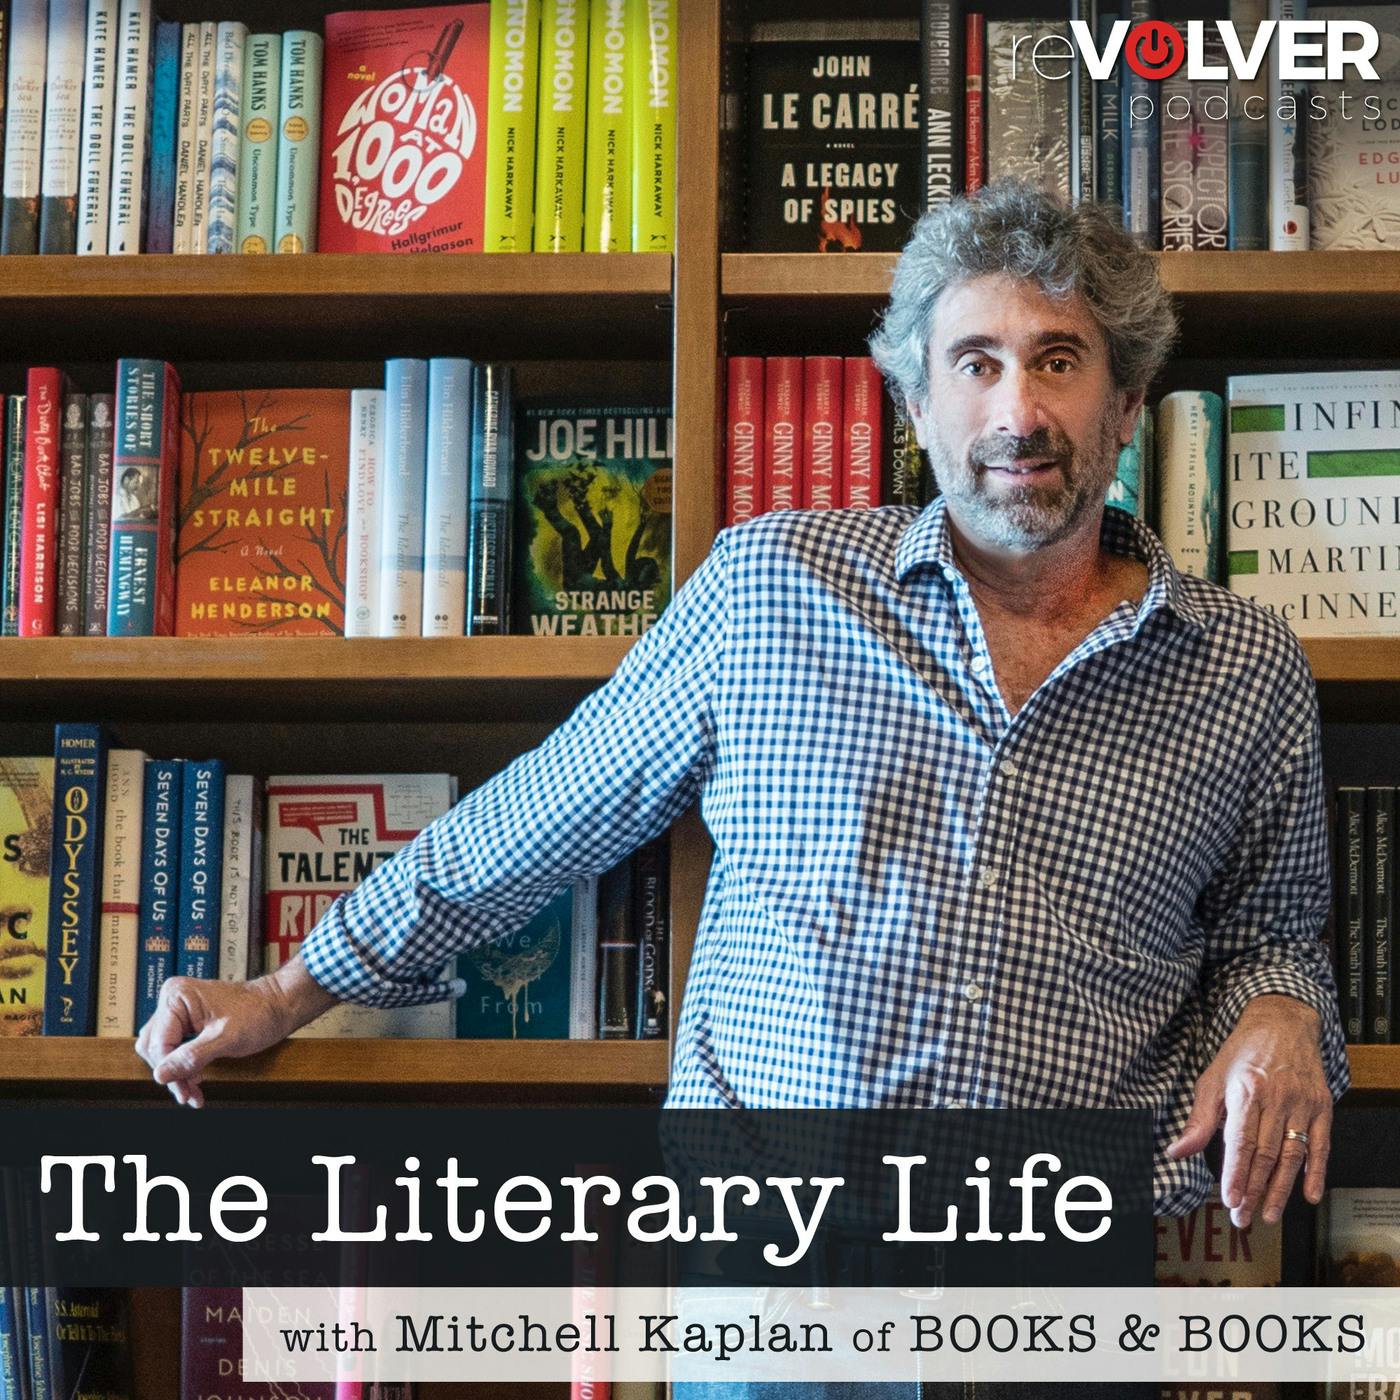 Oren Teicher, CEO of the American Booksellers Association, on indie bookstores and their cultural significance.